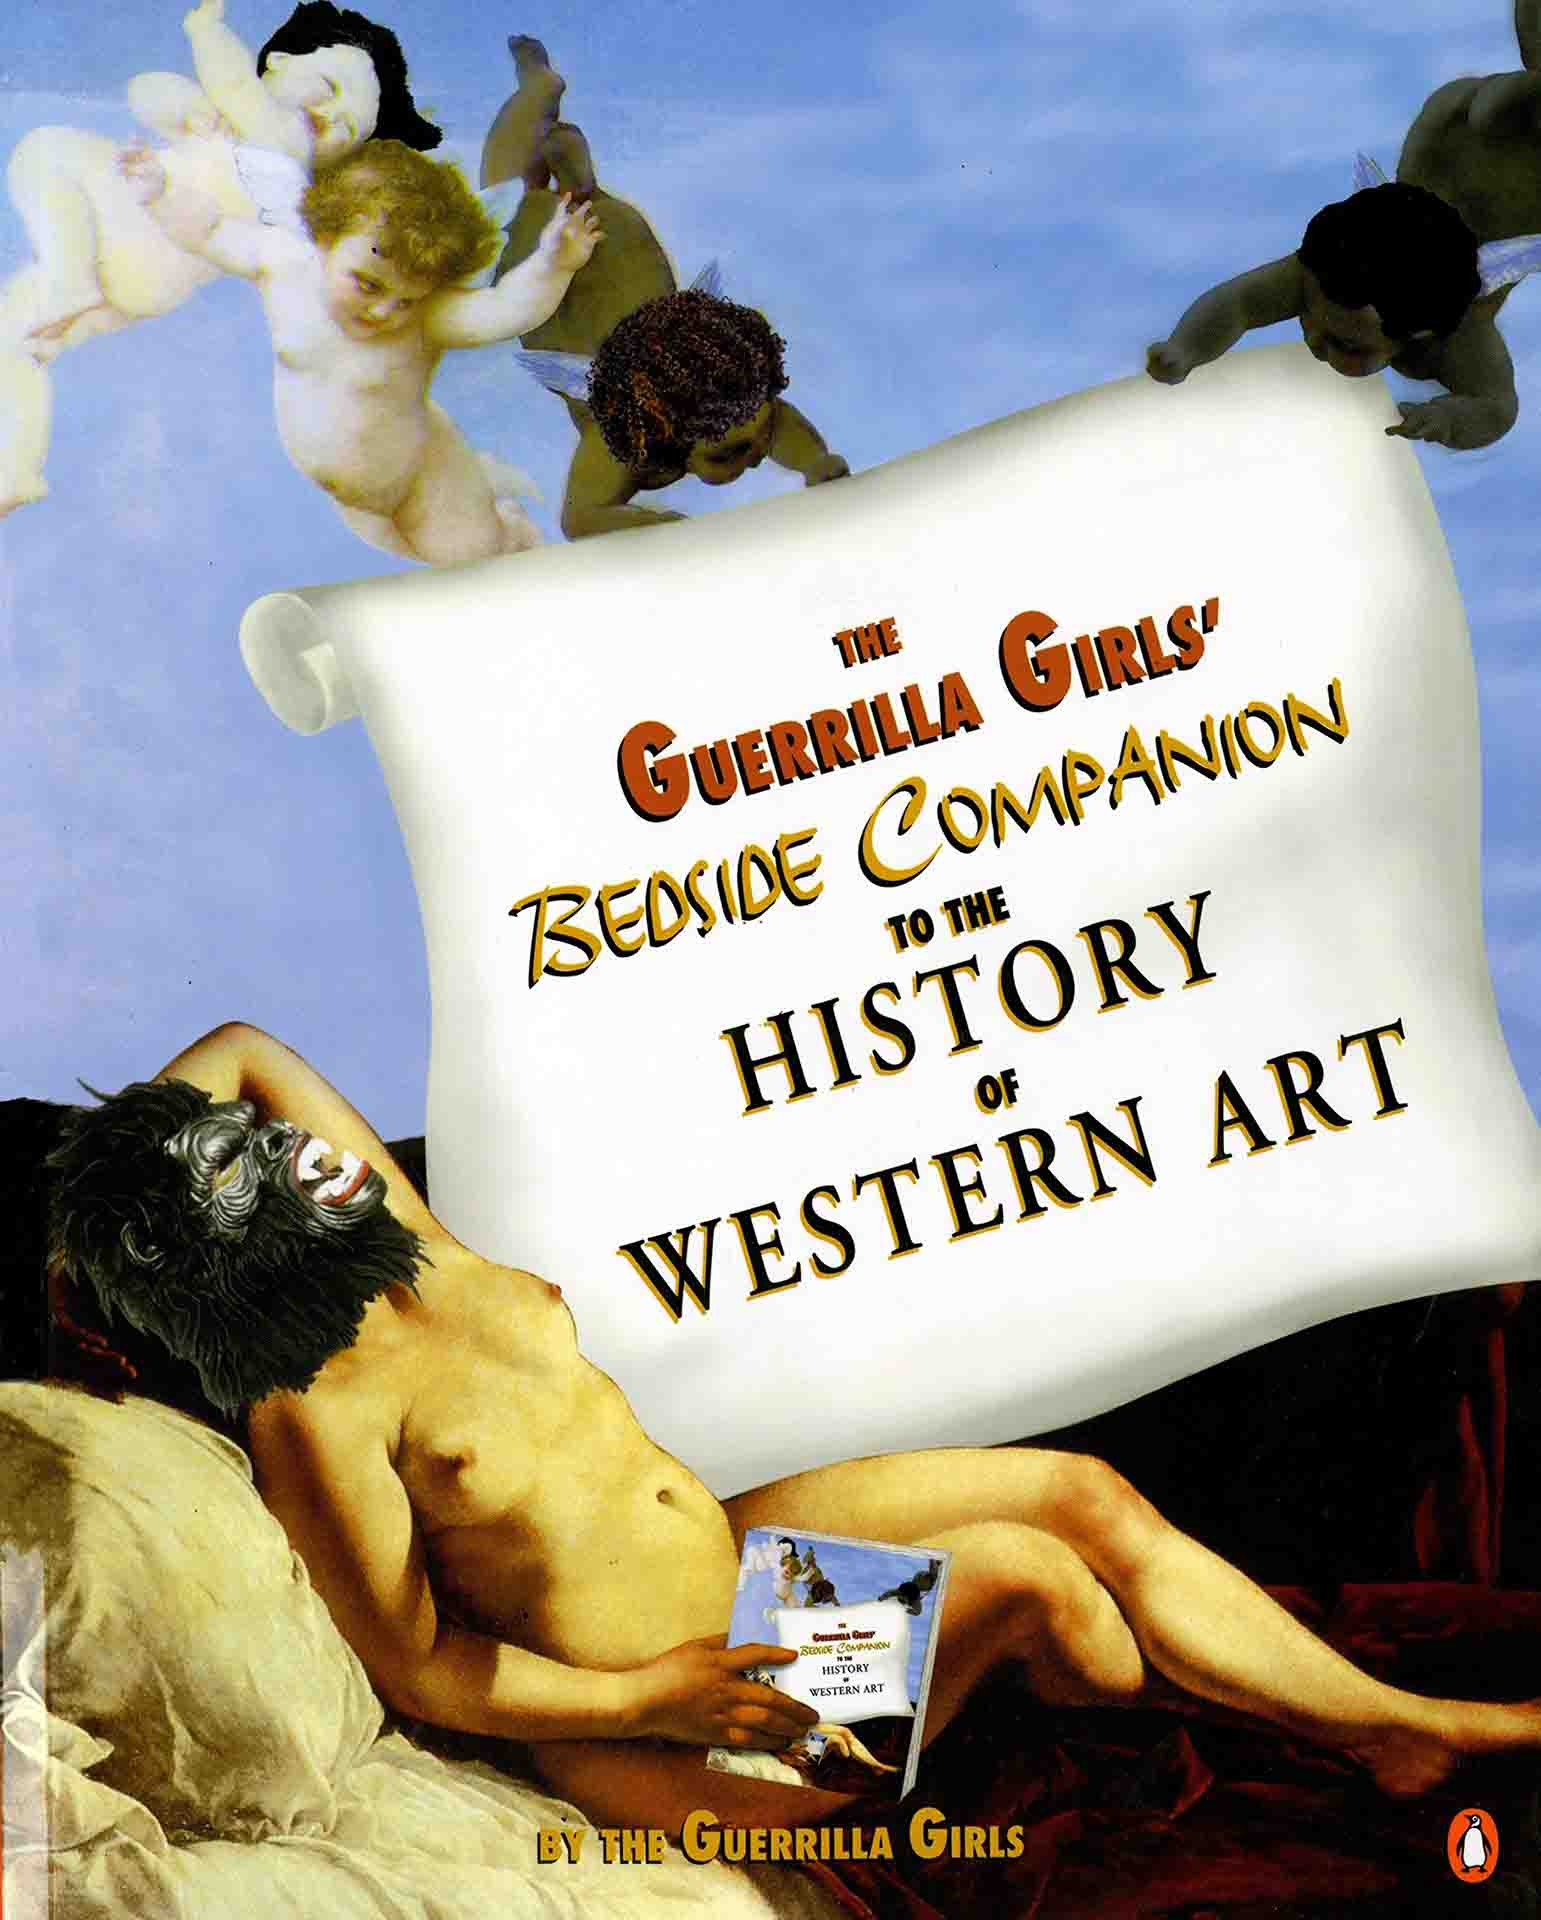 The Geurrilla Girls’ Bedside Companion to the History of Western Art